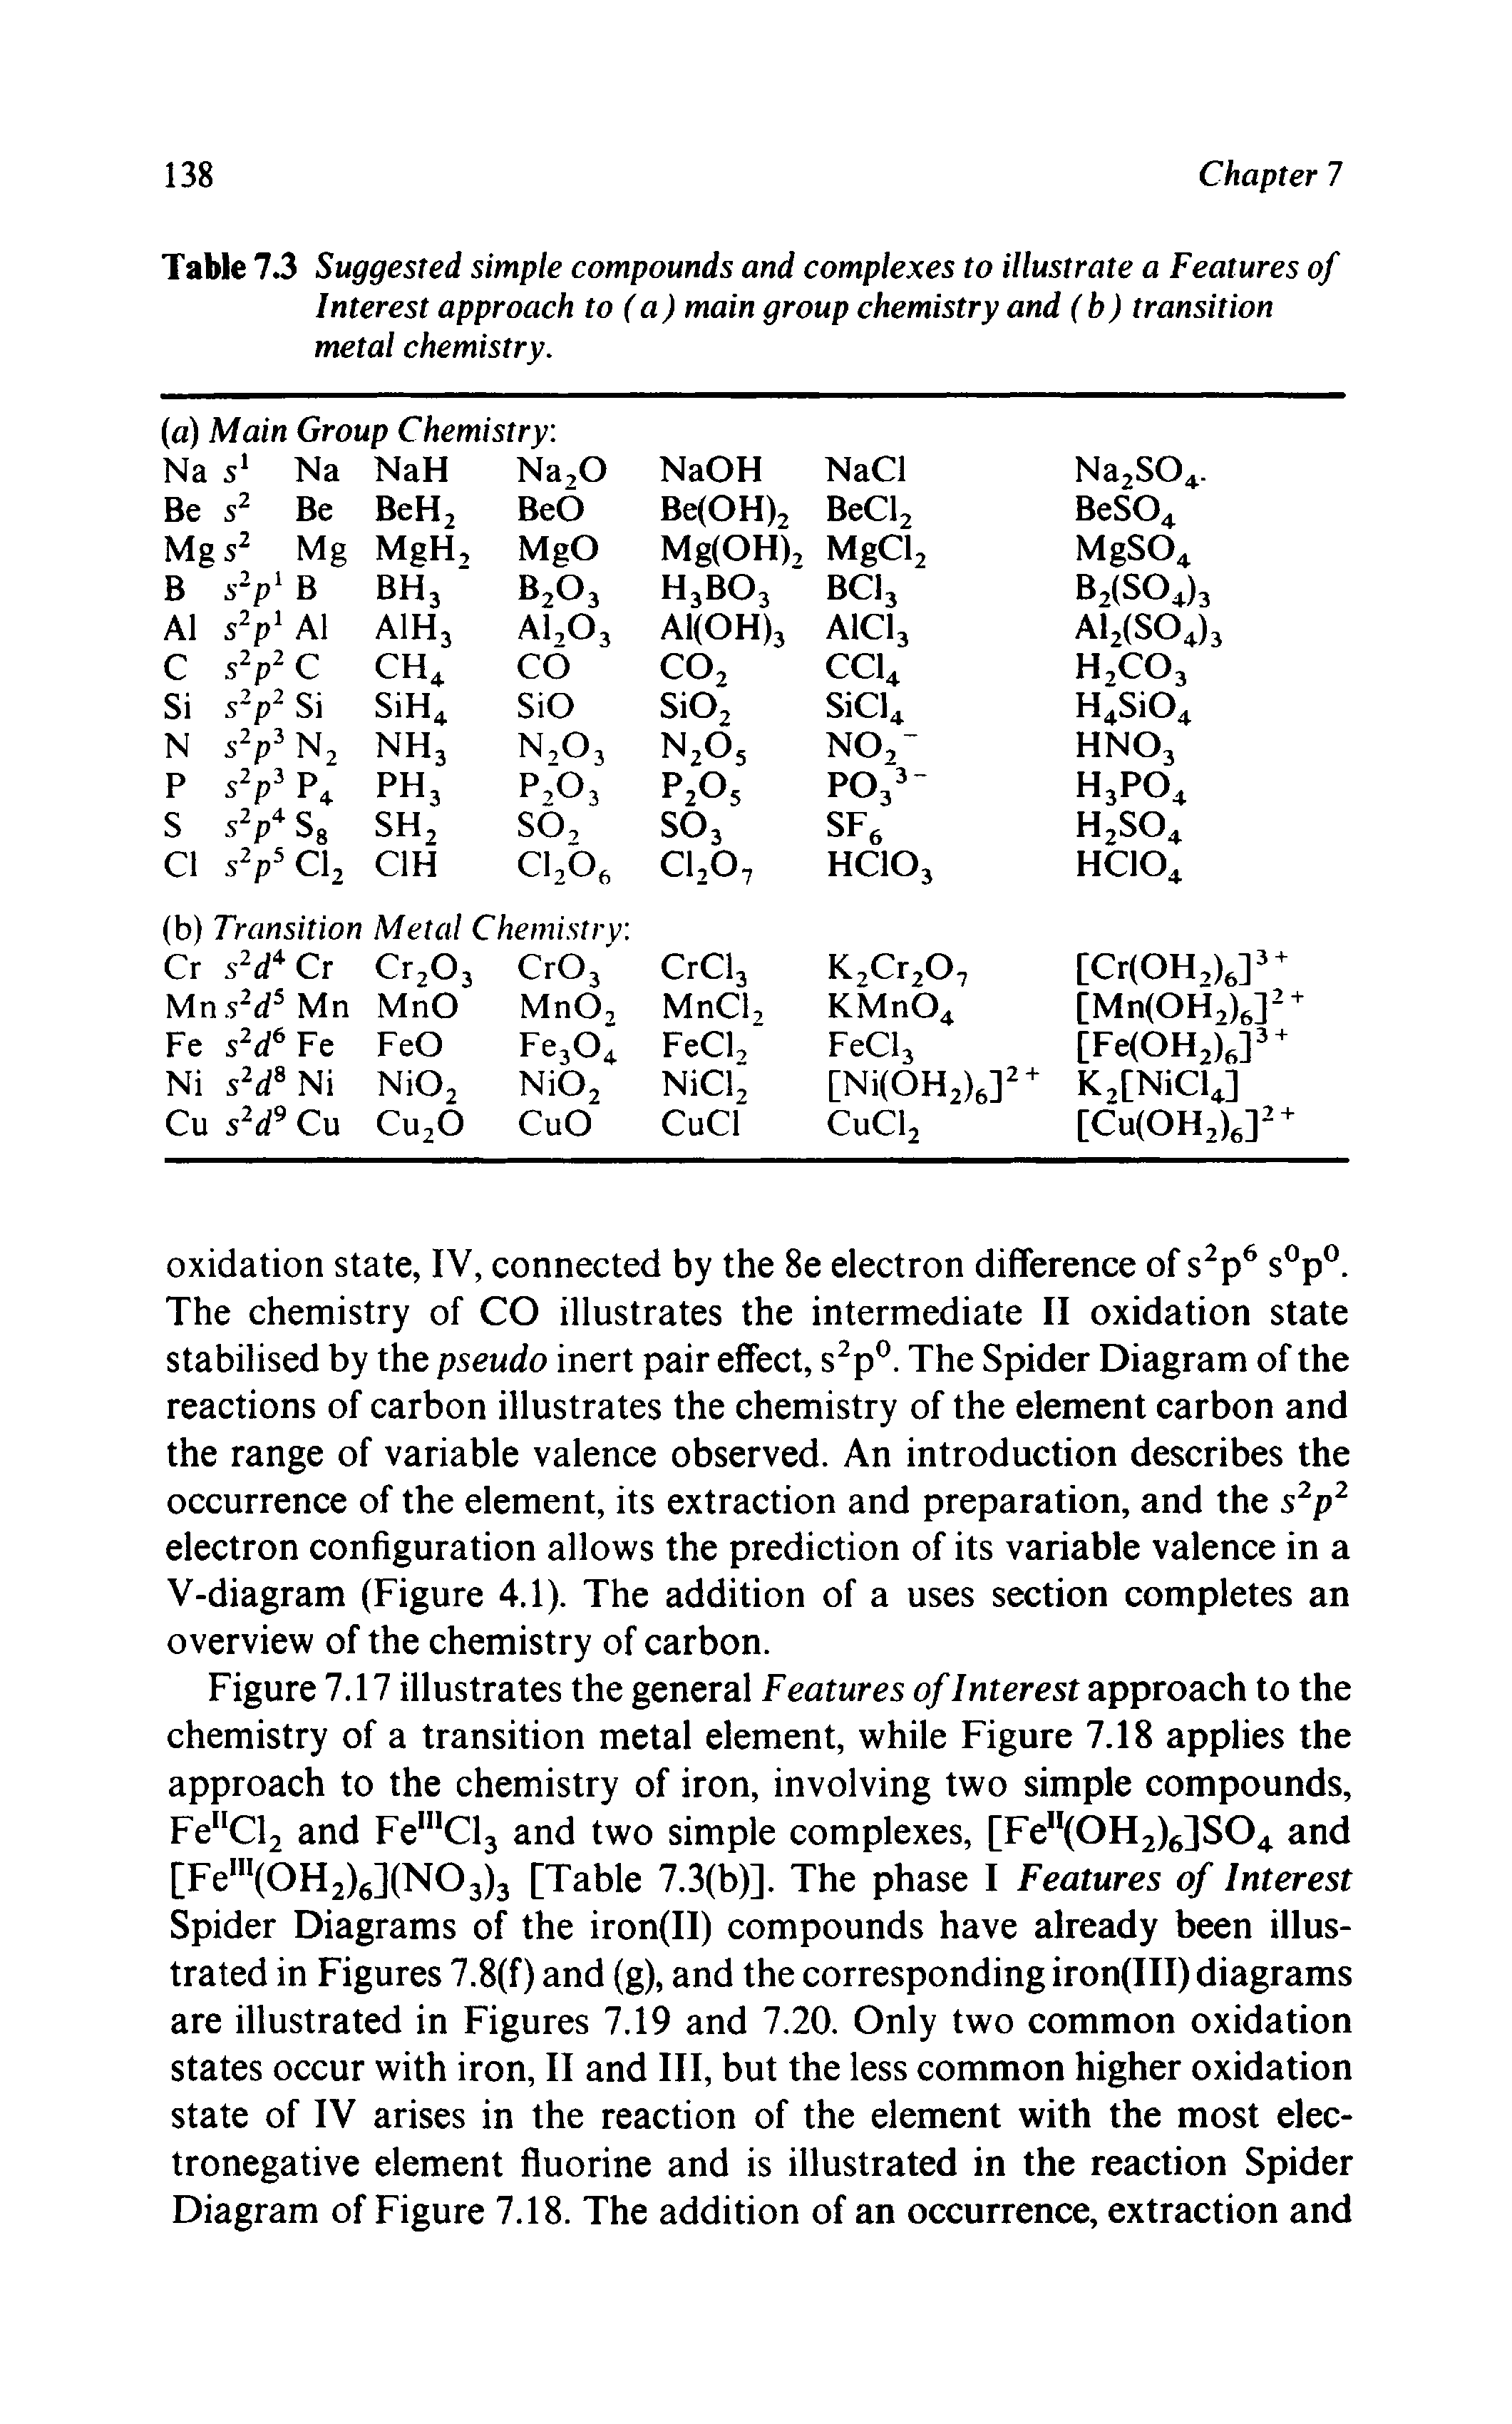 Table 7.3 Suggested simple compounds and complexes to illustrate a Features of Interest approach to (a) main group chemistry and (b) transition metal chemistry.